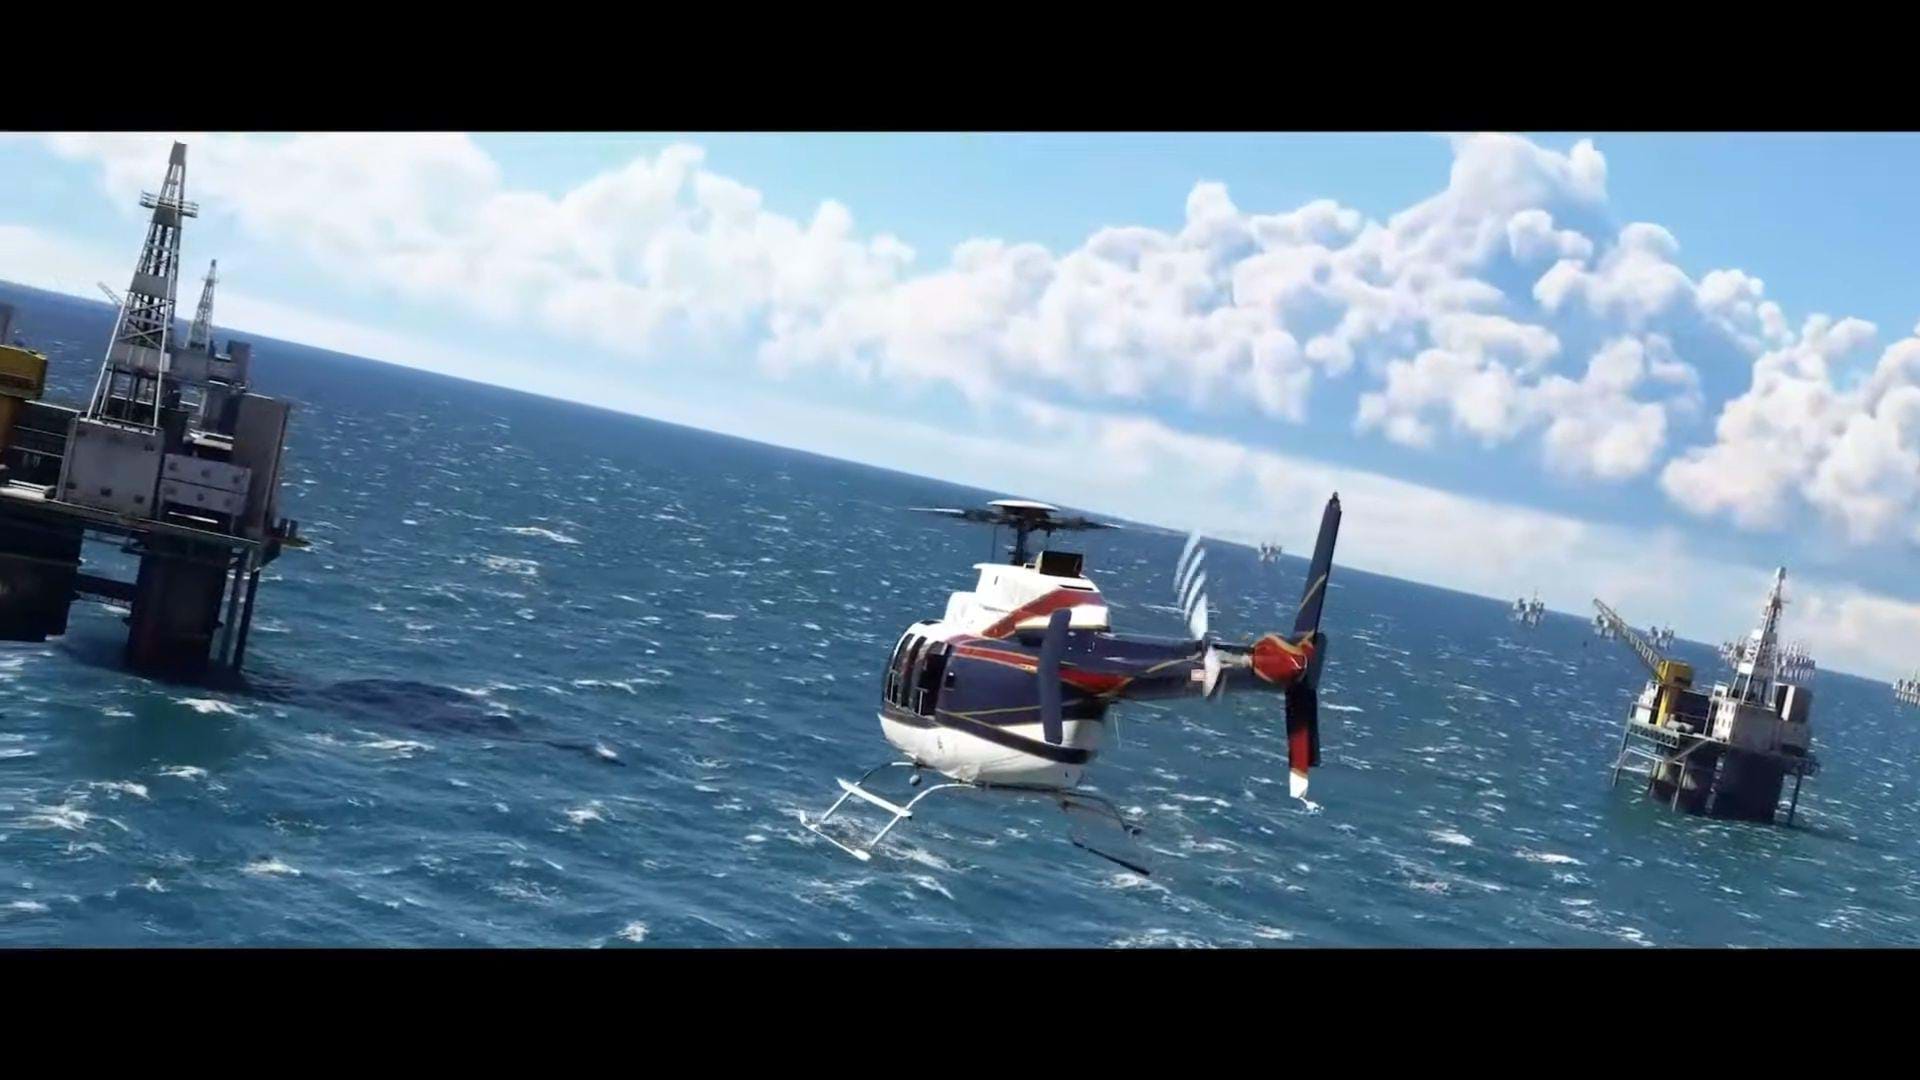 Microsoft shows first helicopters in Microsoft Flight Simulator – which may be available in November